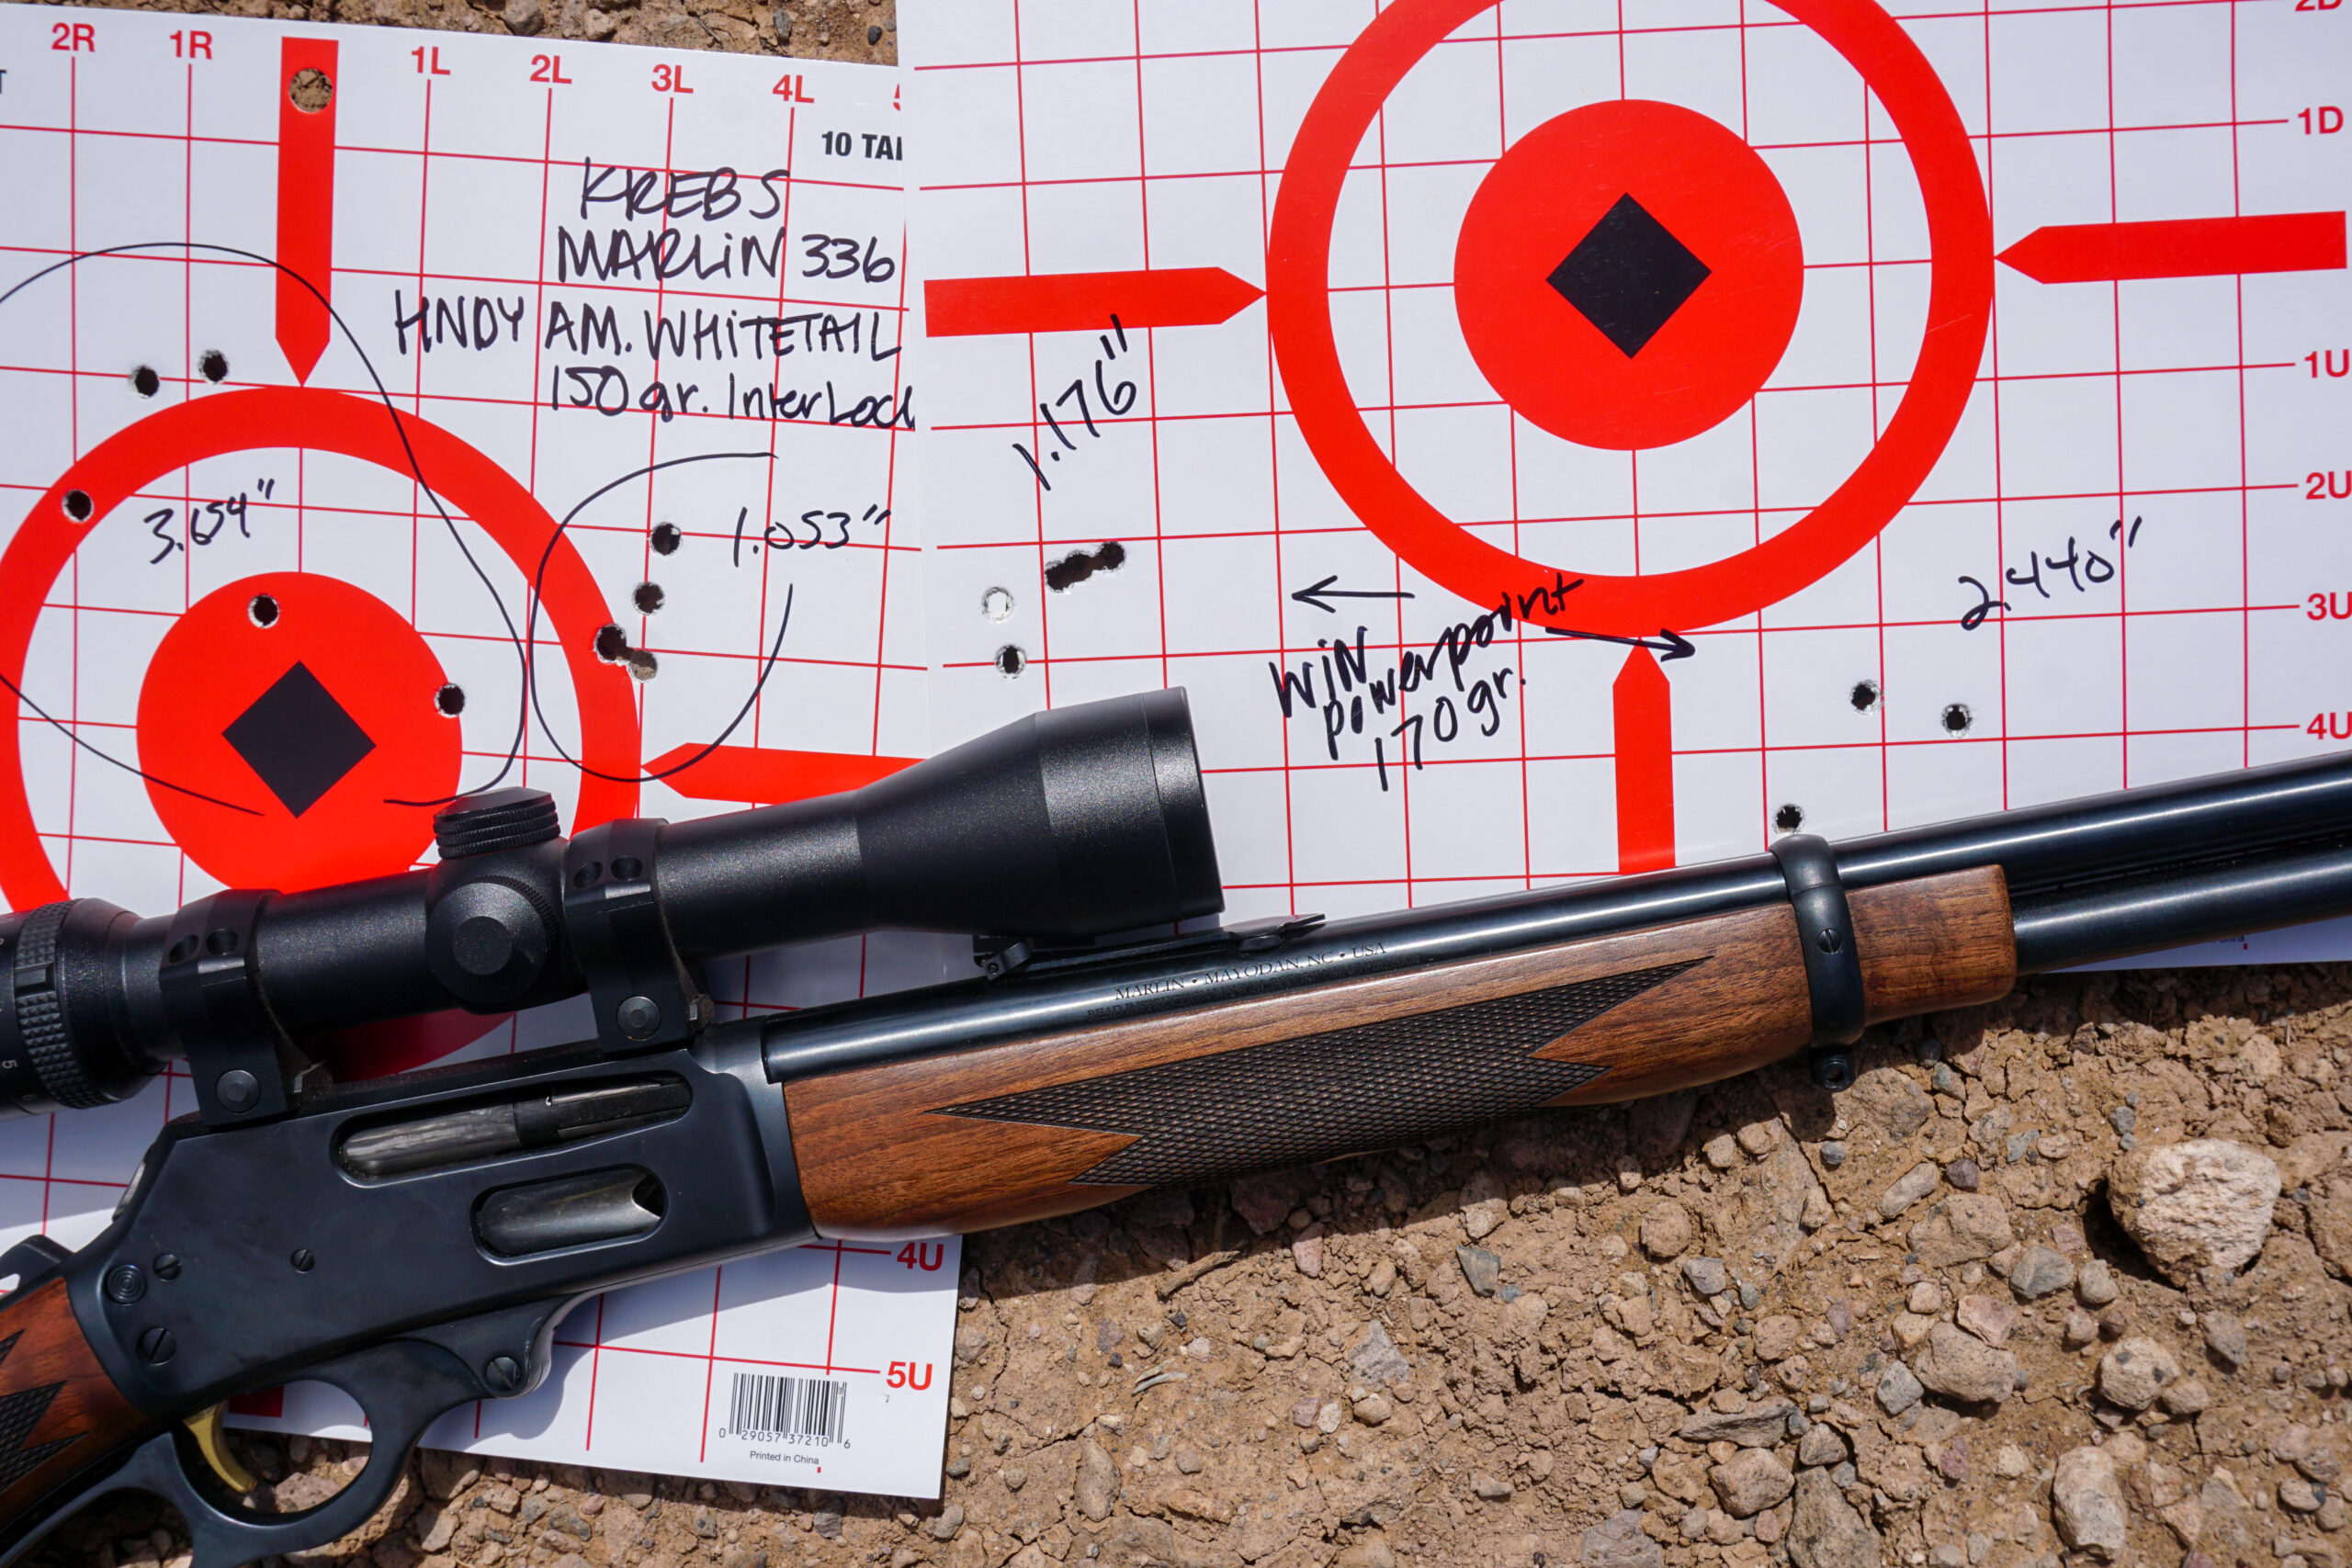 The Marlin 336 Classic groups